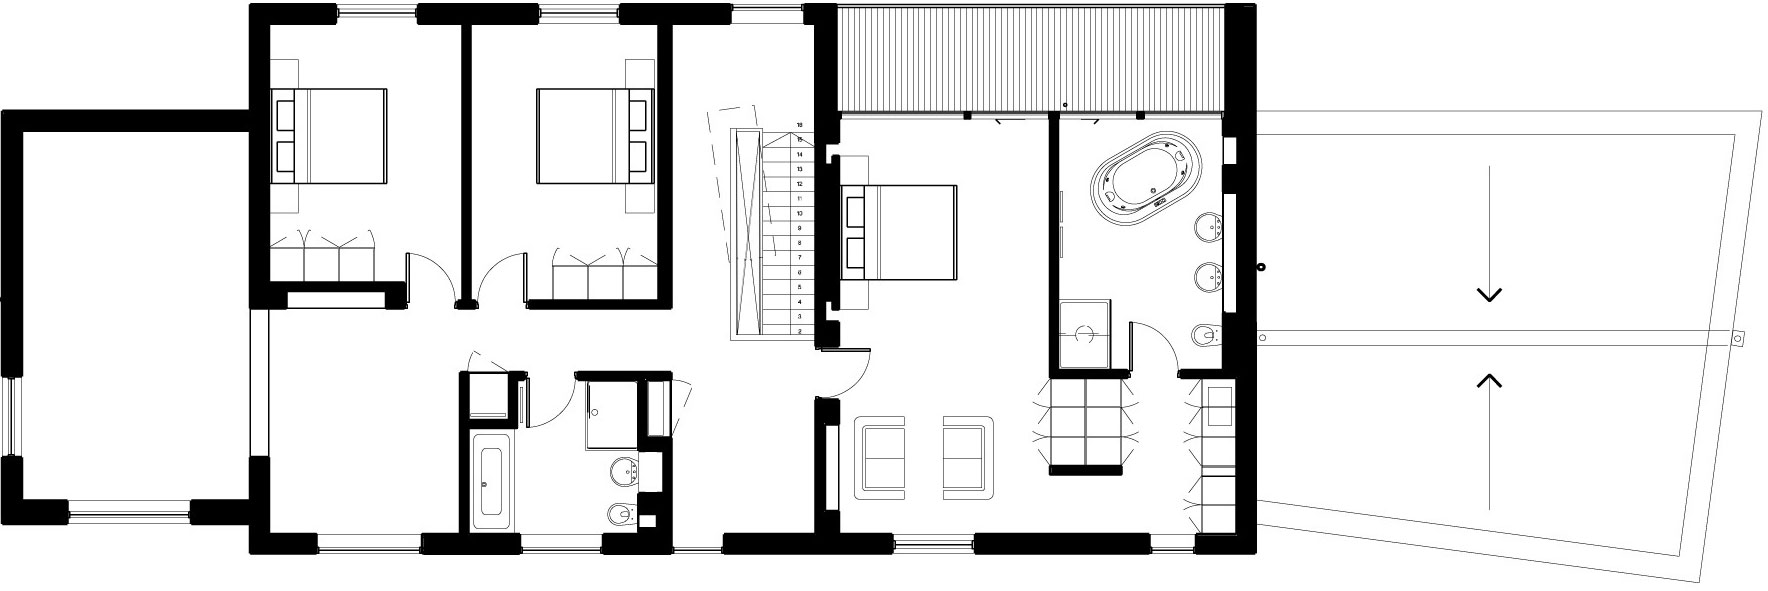 Floor Plan Meadowview Second Floor Plan Family Rustic Meadowview House Design Ideas By Platform 5 Architects Architecture Captivating Rustic Family Home Designed For A Retired Couple